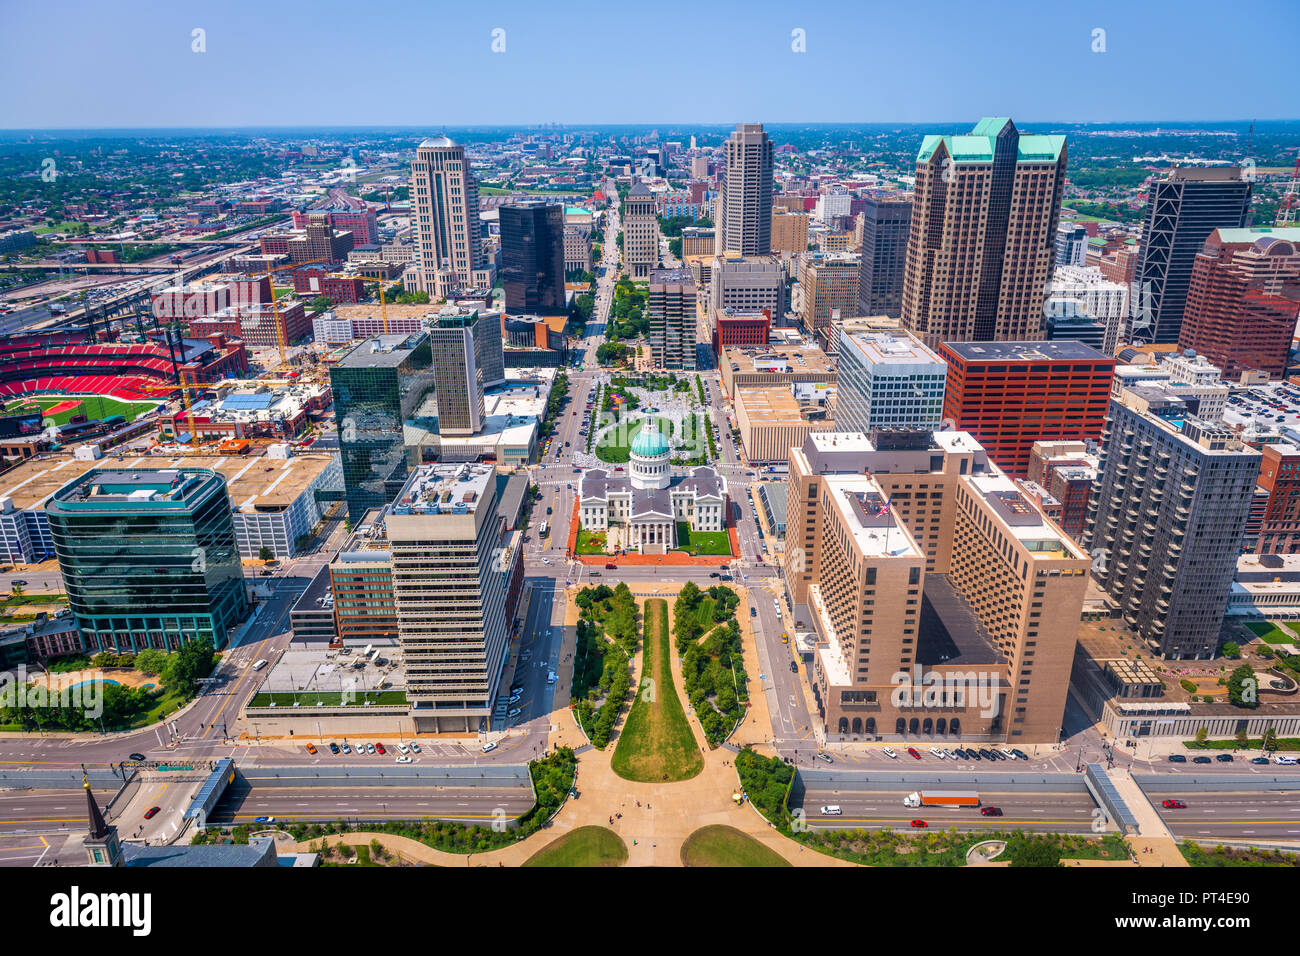 St. Louis, Missouri, USA downtown skyline from above. Stock Photo